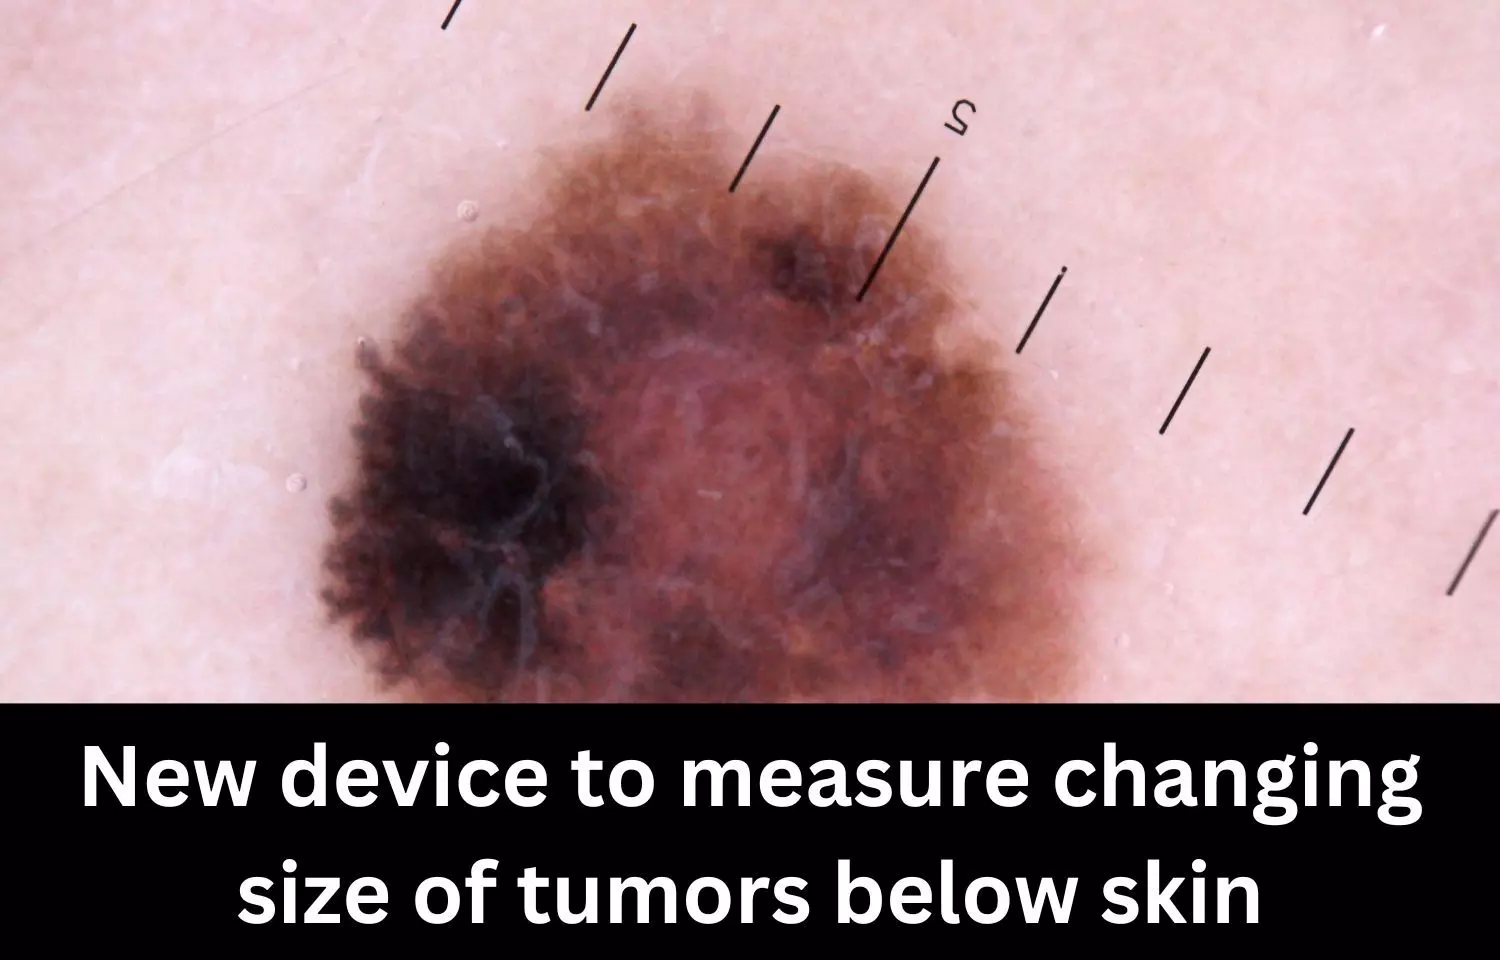 New device discovered by scientists to measure changing size of tumors below skin